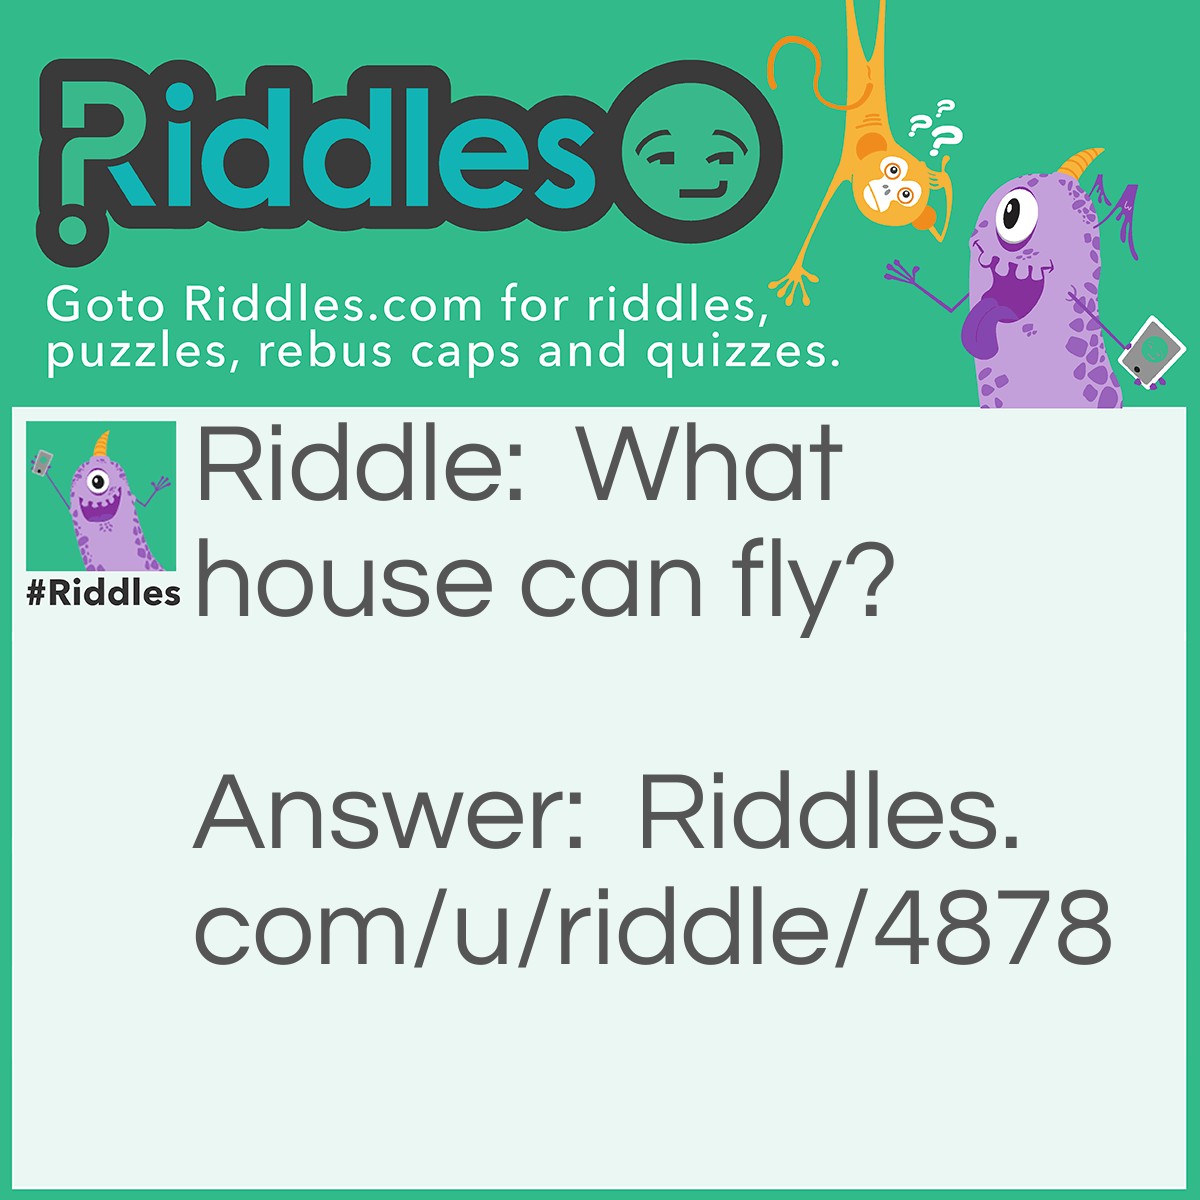 Riddle: What house can fly? Answer: A housefly.